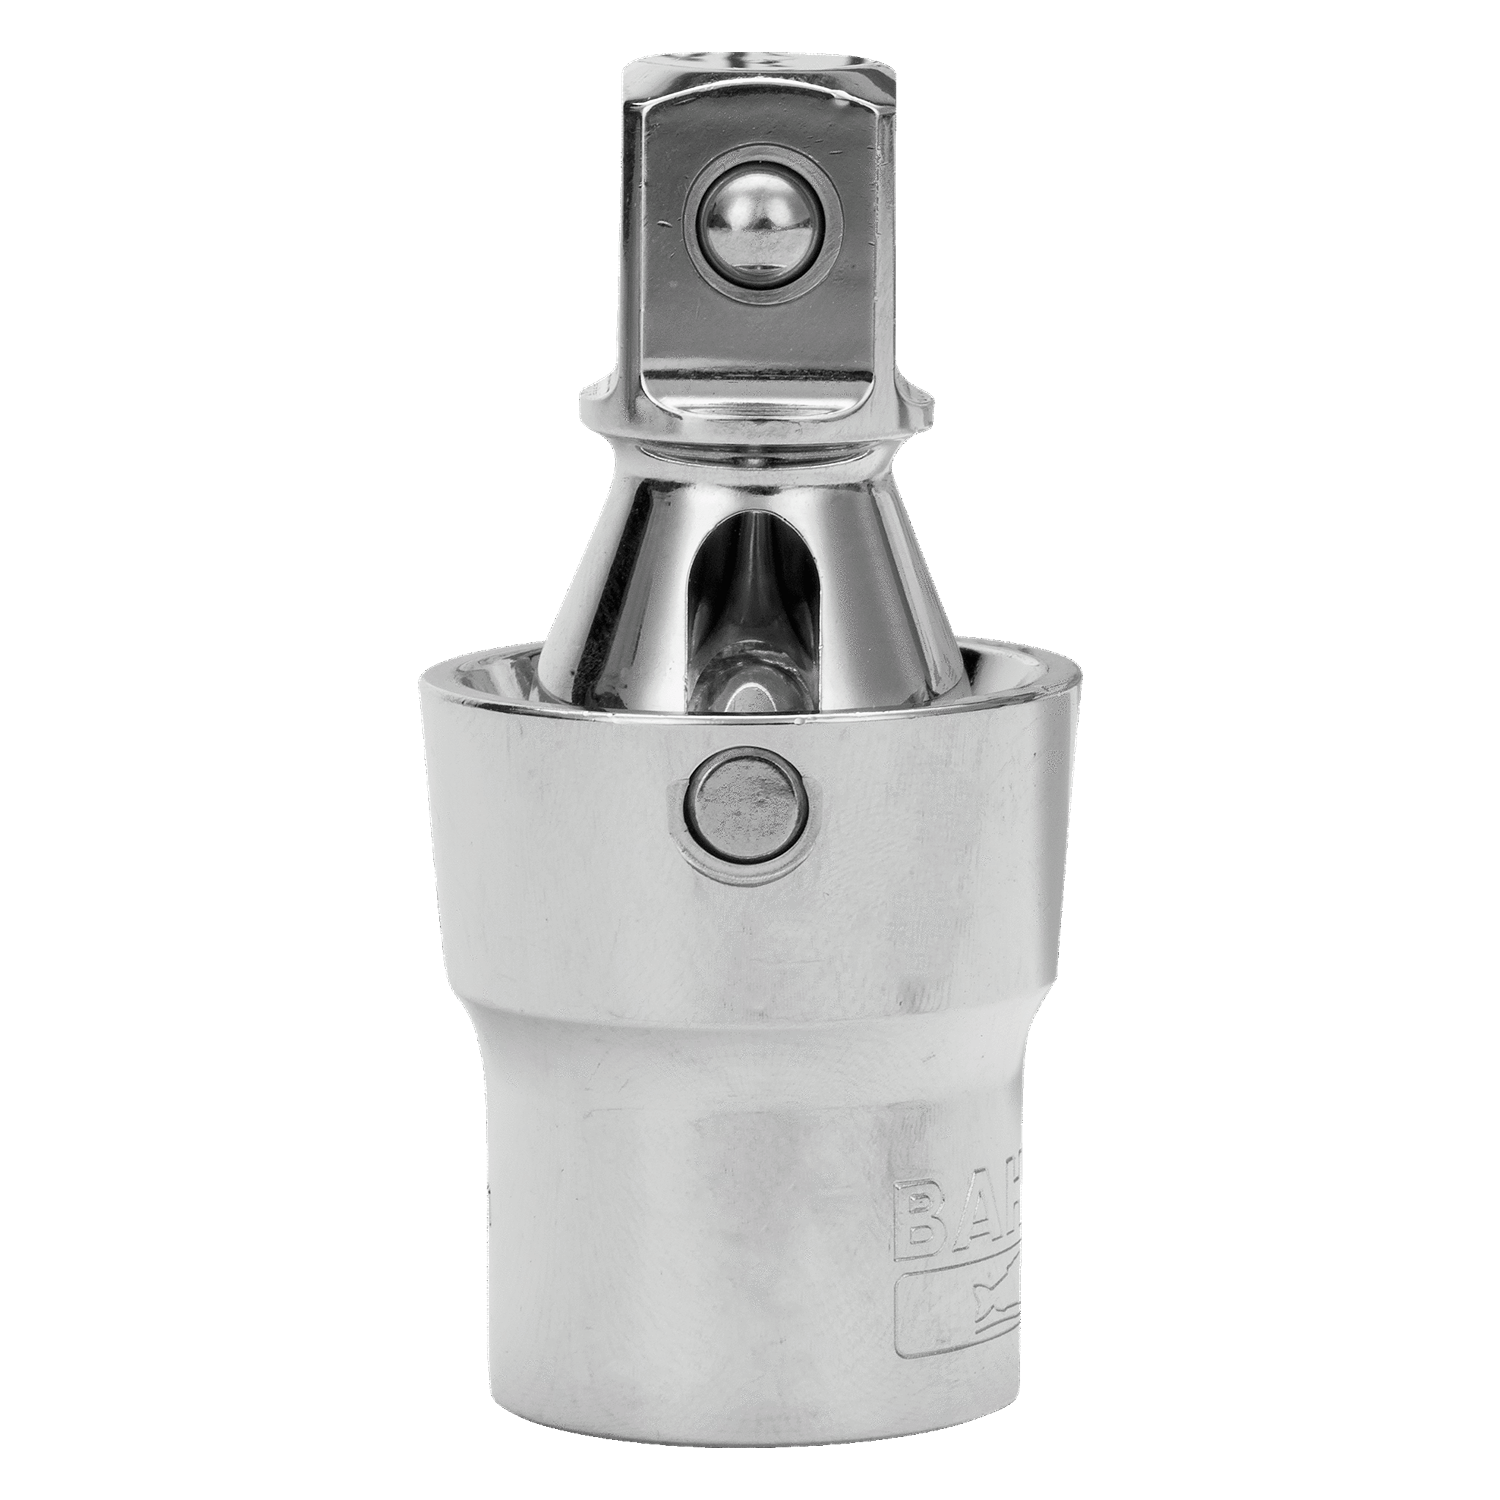 BAHCO 8168 1/2" Square Drive Universal Joint Smooth Operations - Premium Universal Joint from BAHCO - Shop now at Yew Aik.